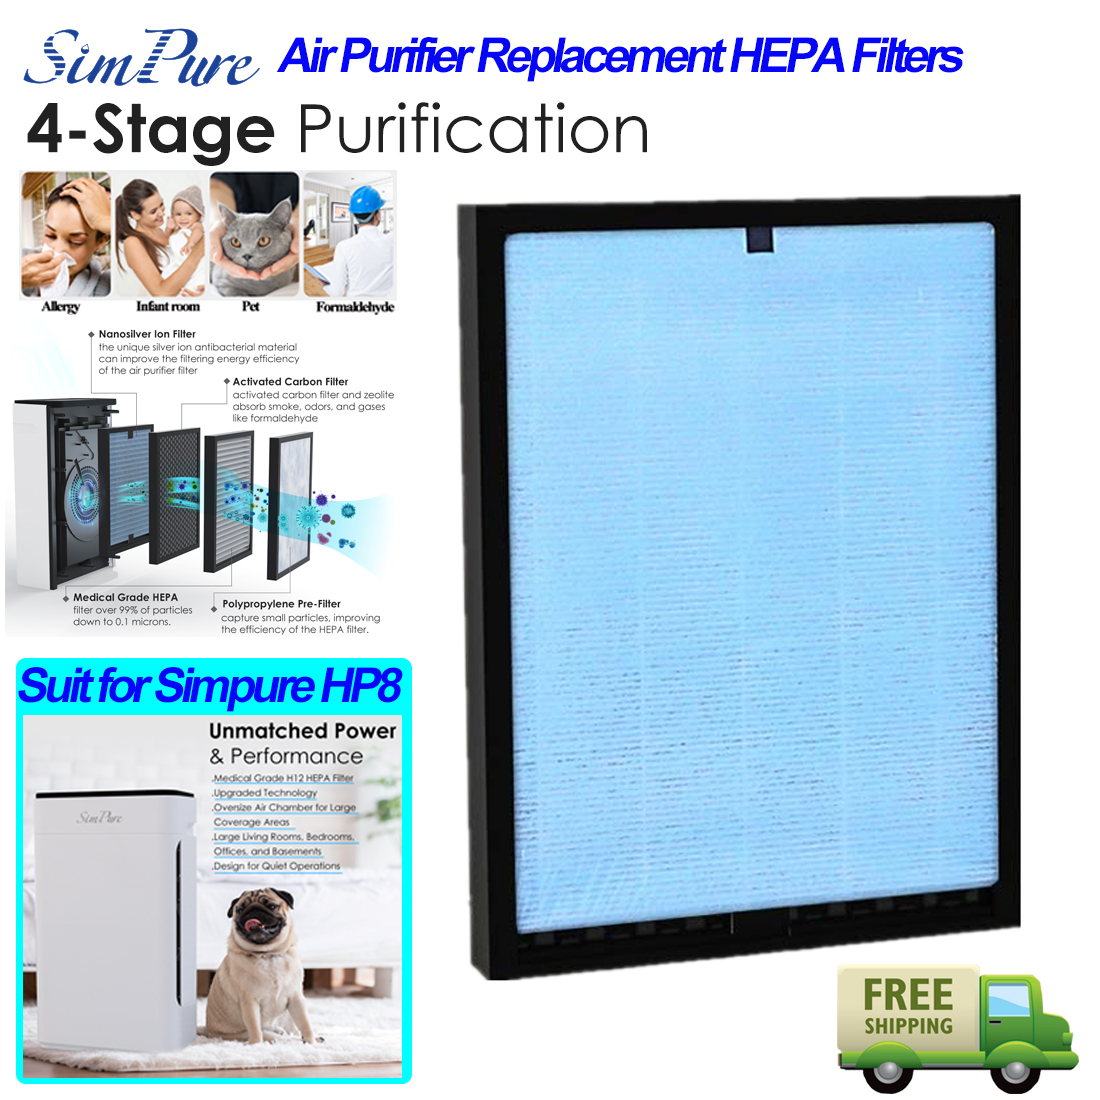 6 Pack Replacement Filter for SimPure HP8 Air Purifier 4 Stage Filtration HEPA